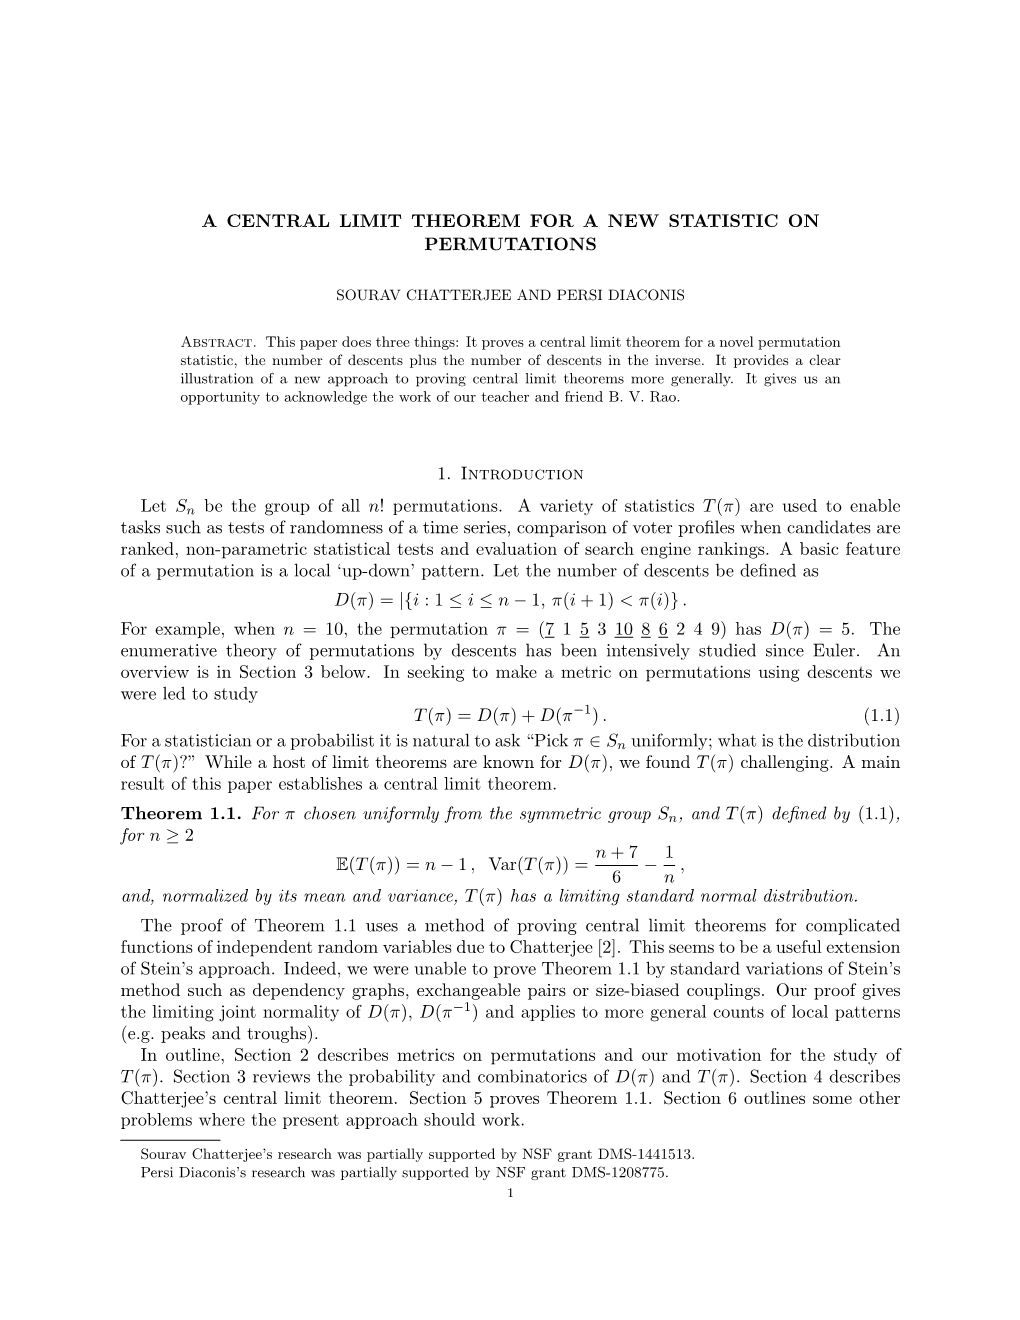 A Central Limit Theorem for a New Statistic on Permutations